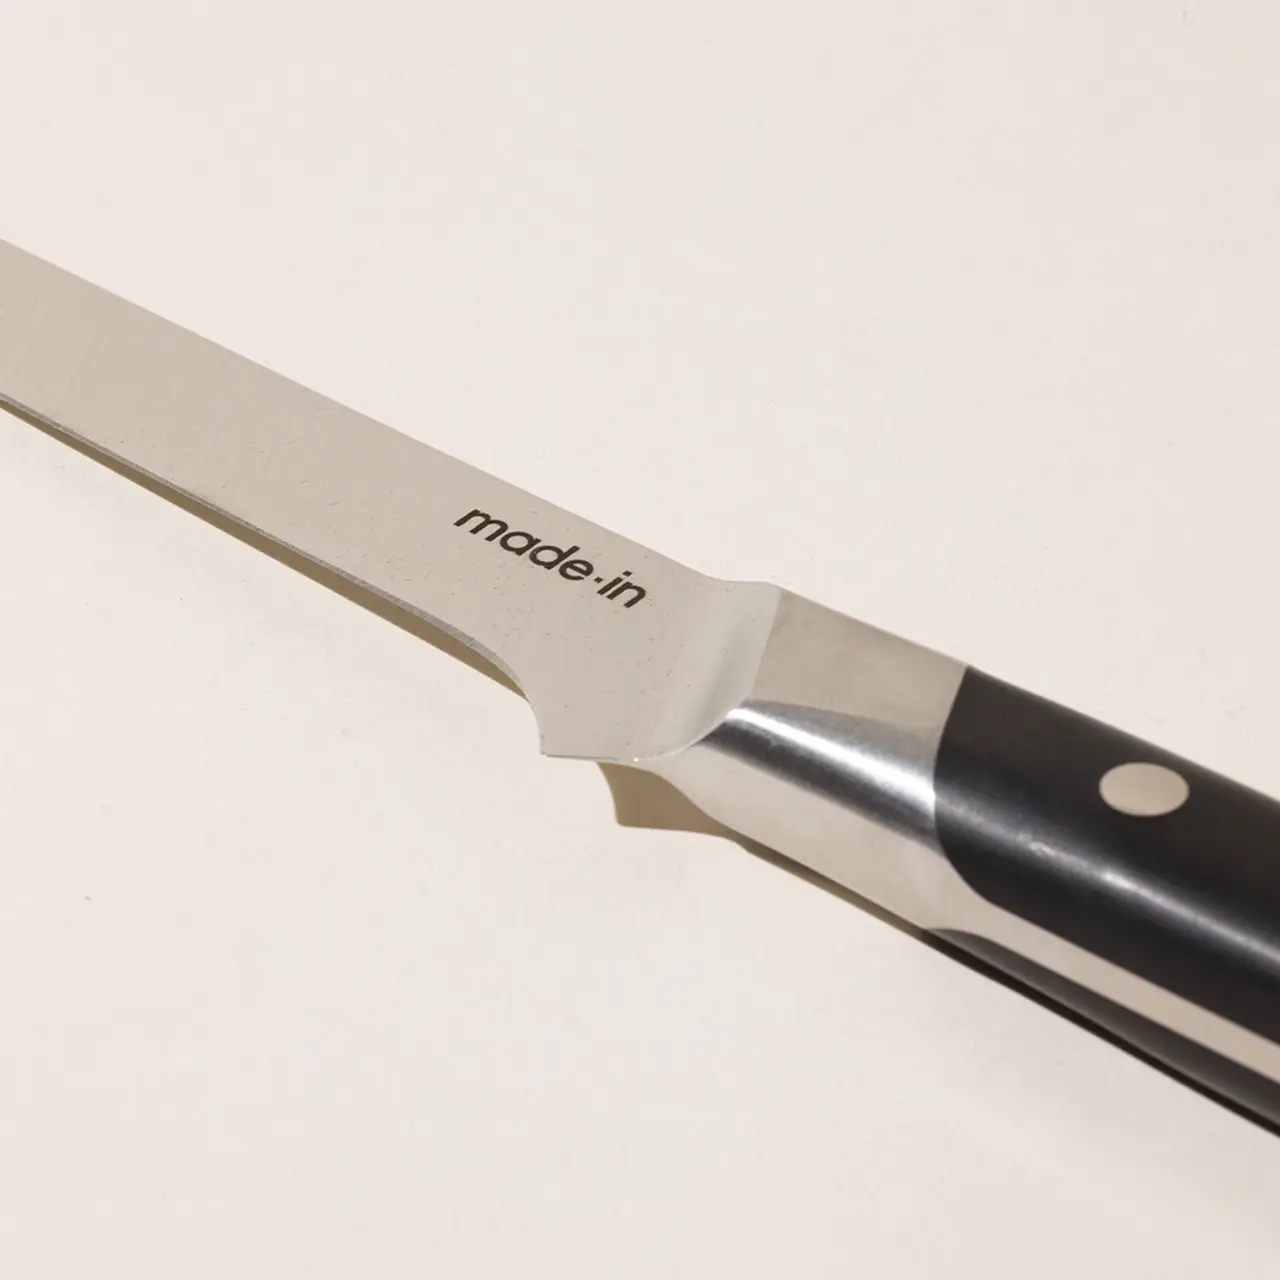 A close-up of a stainless steel kitchen knife with the inscription "made.in" on the blade, positioned against a plain background.